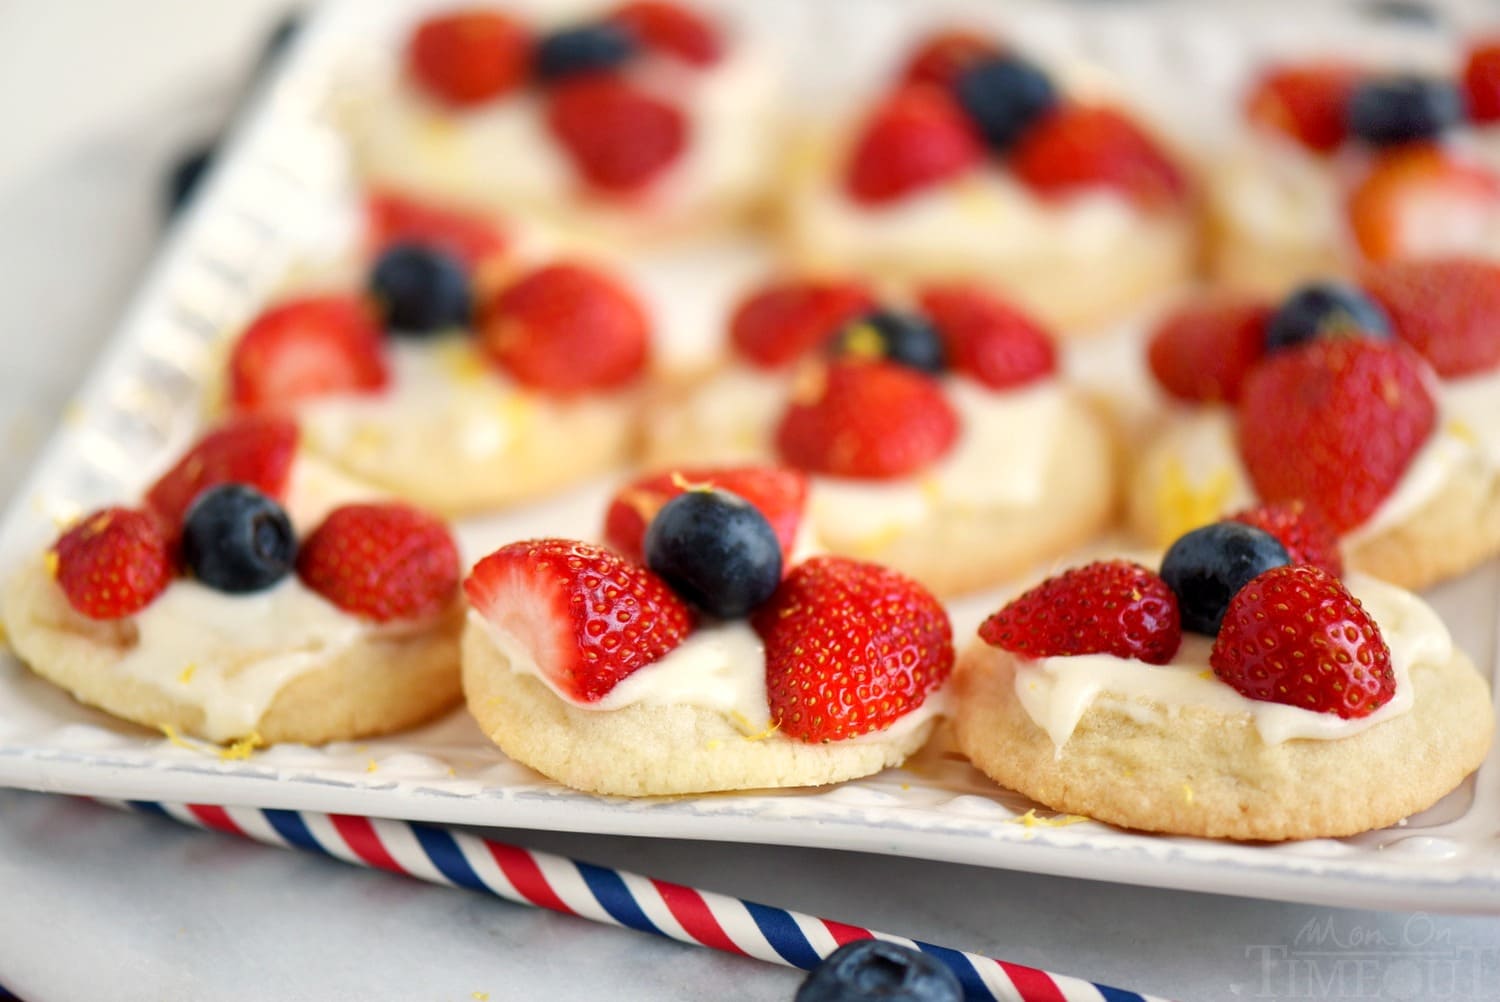 Almost too pretty to eat, these Berries 'N Cream Cookies are the easiest recipe you'll make all summer long! Sweet sugar cookies are topped with a bright, lemon cream cheese frosting and fresh berries! Soooo good!